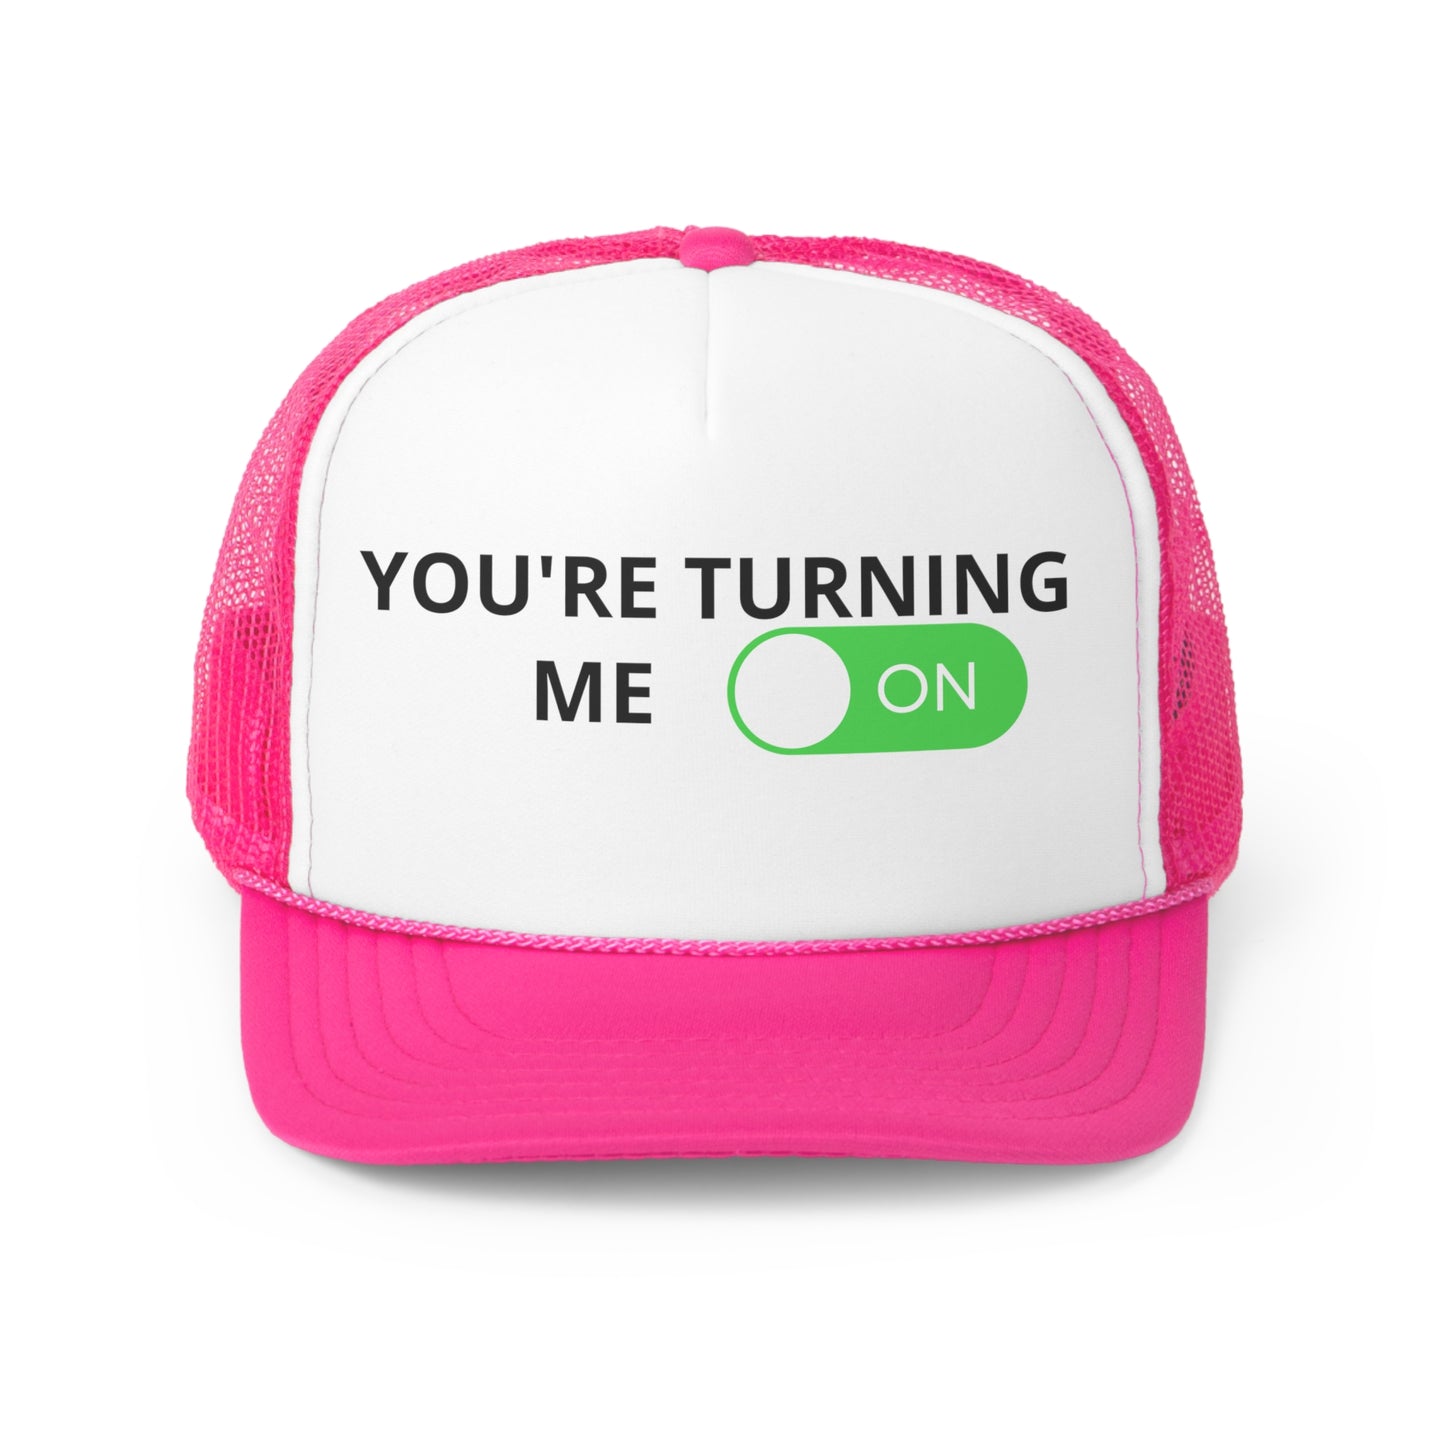 You are turning me on Trucker Cap